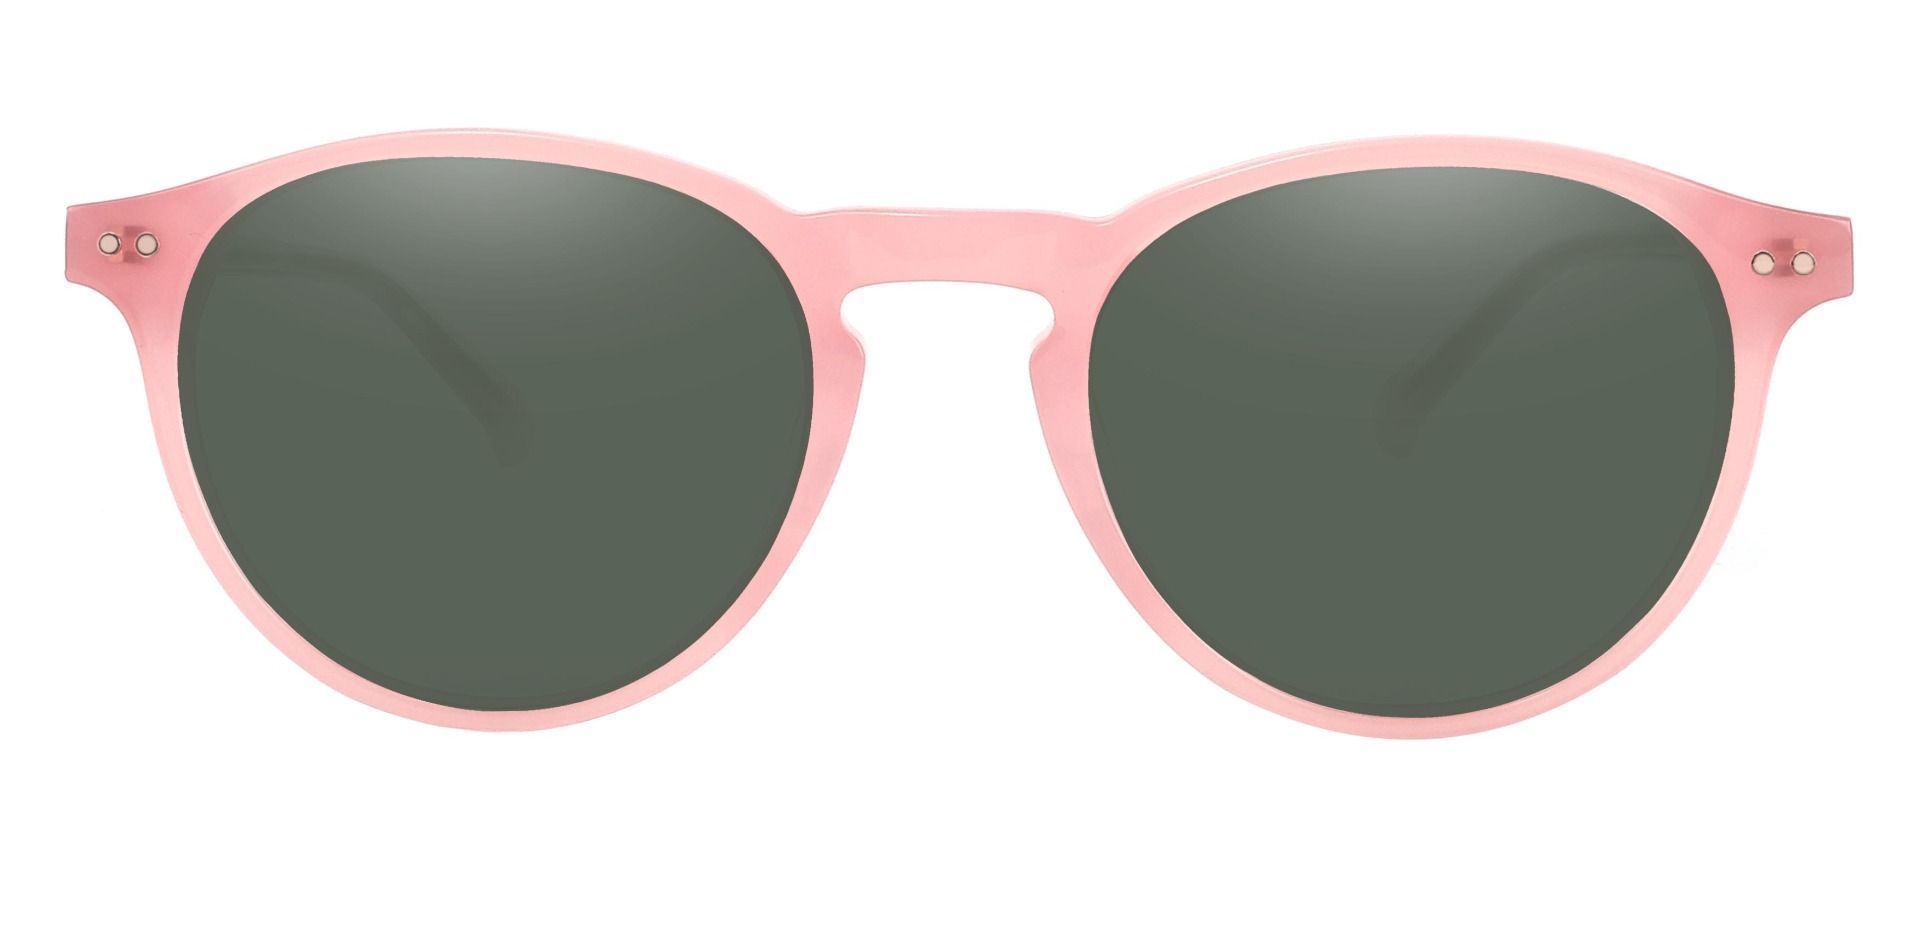 Monarch Oval Reading Sunglasses - Pink Frame With Green Lenses